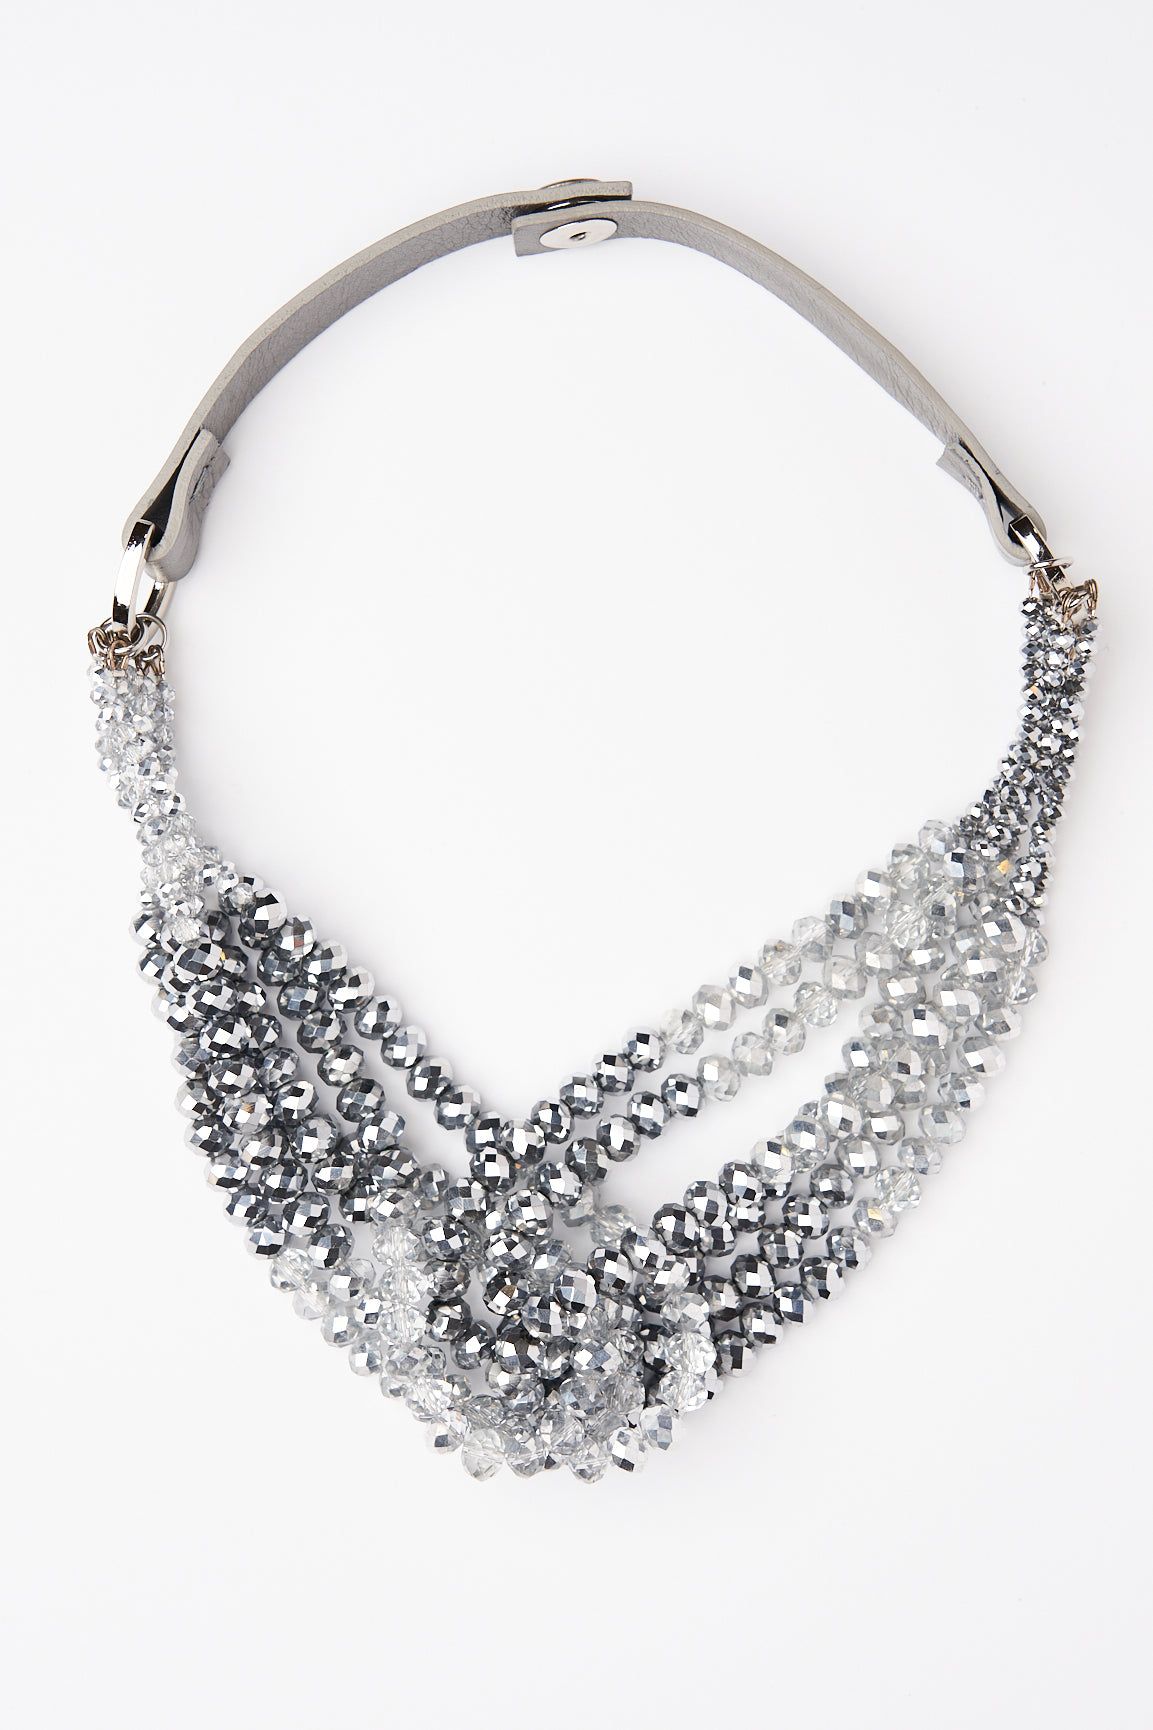 SILVER BEADED NECKLACE